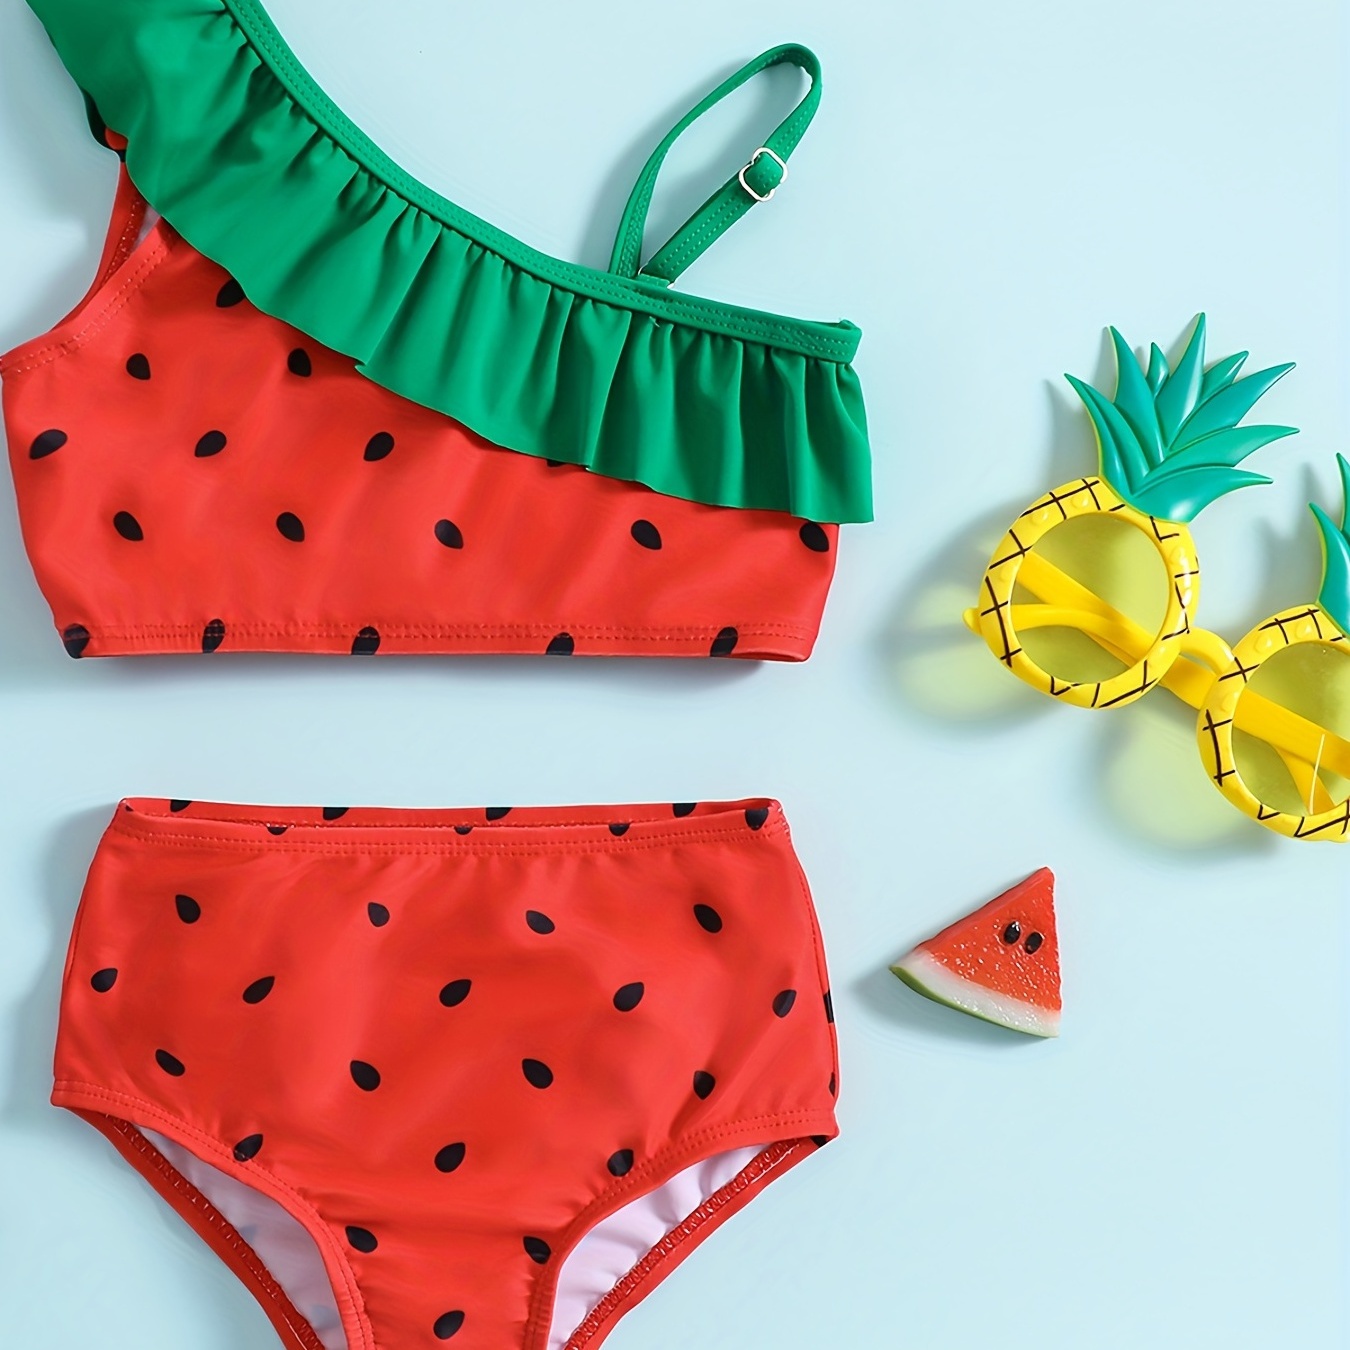 

2pcs Toddler's Lovely Watermelon Themed Bikini Set, Stretchy Ruffle Decor One-shoulder Bathing Suit, Baby Girl's Swimsuit For Summer Beach Holiday